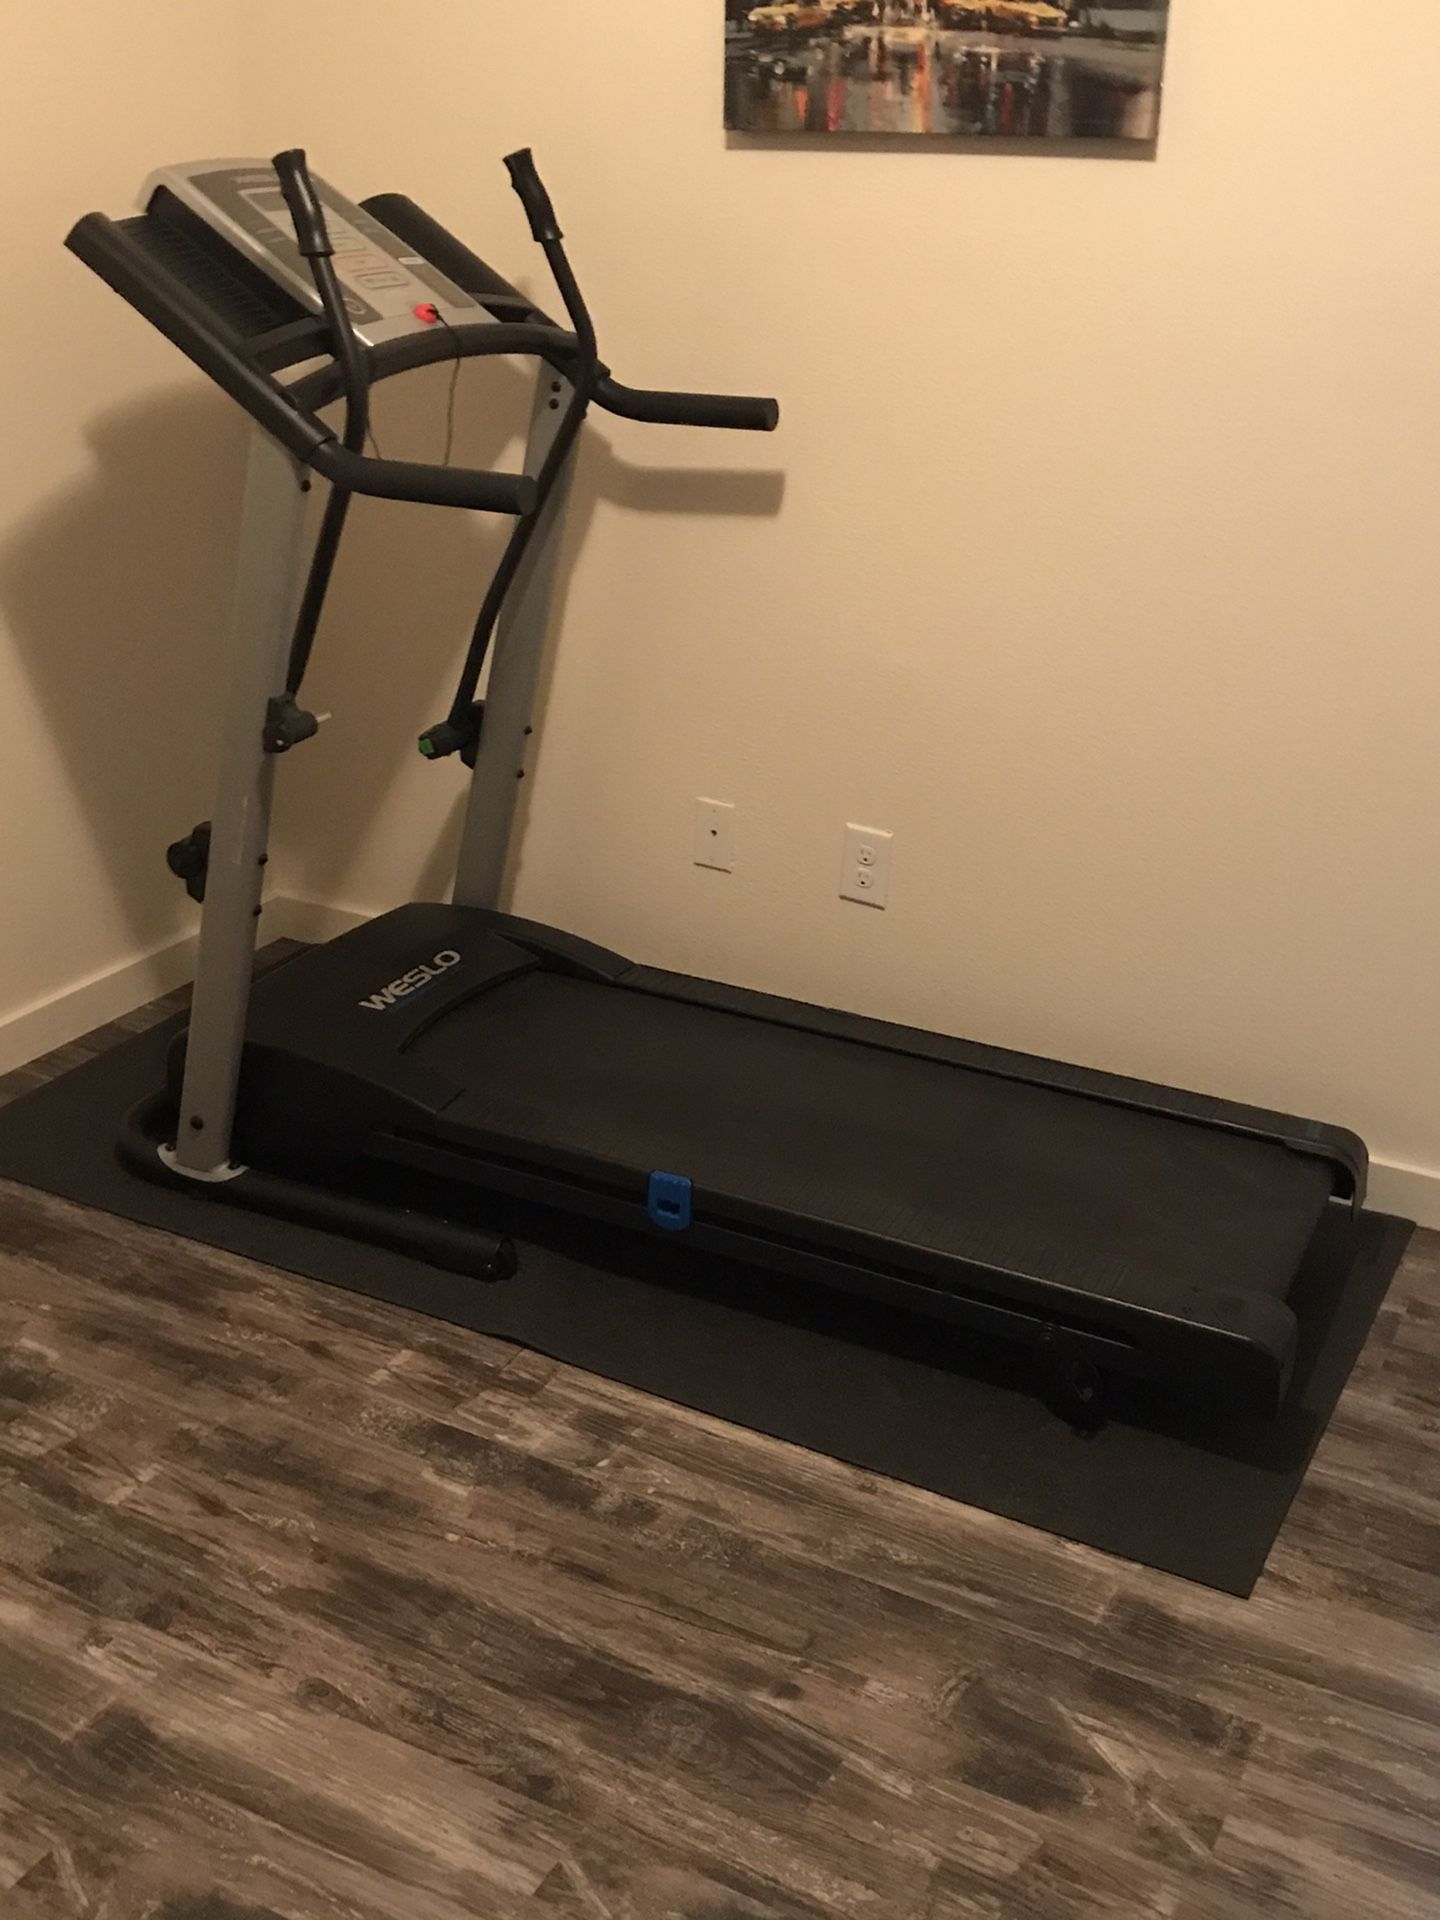 Weslo treadmill for sale - only used one month